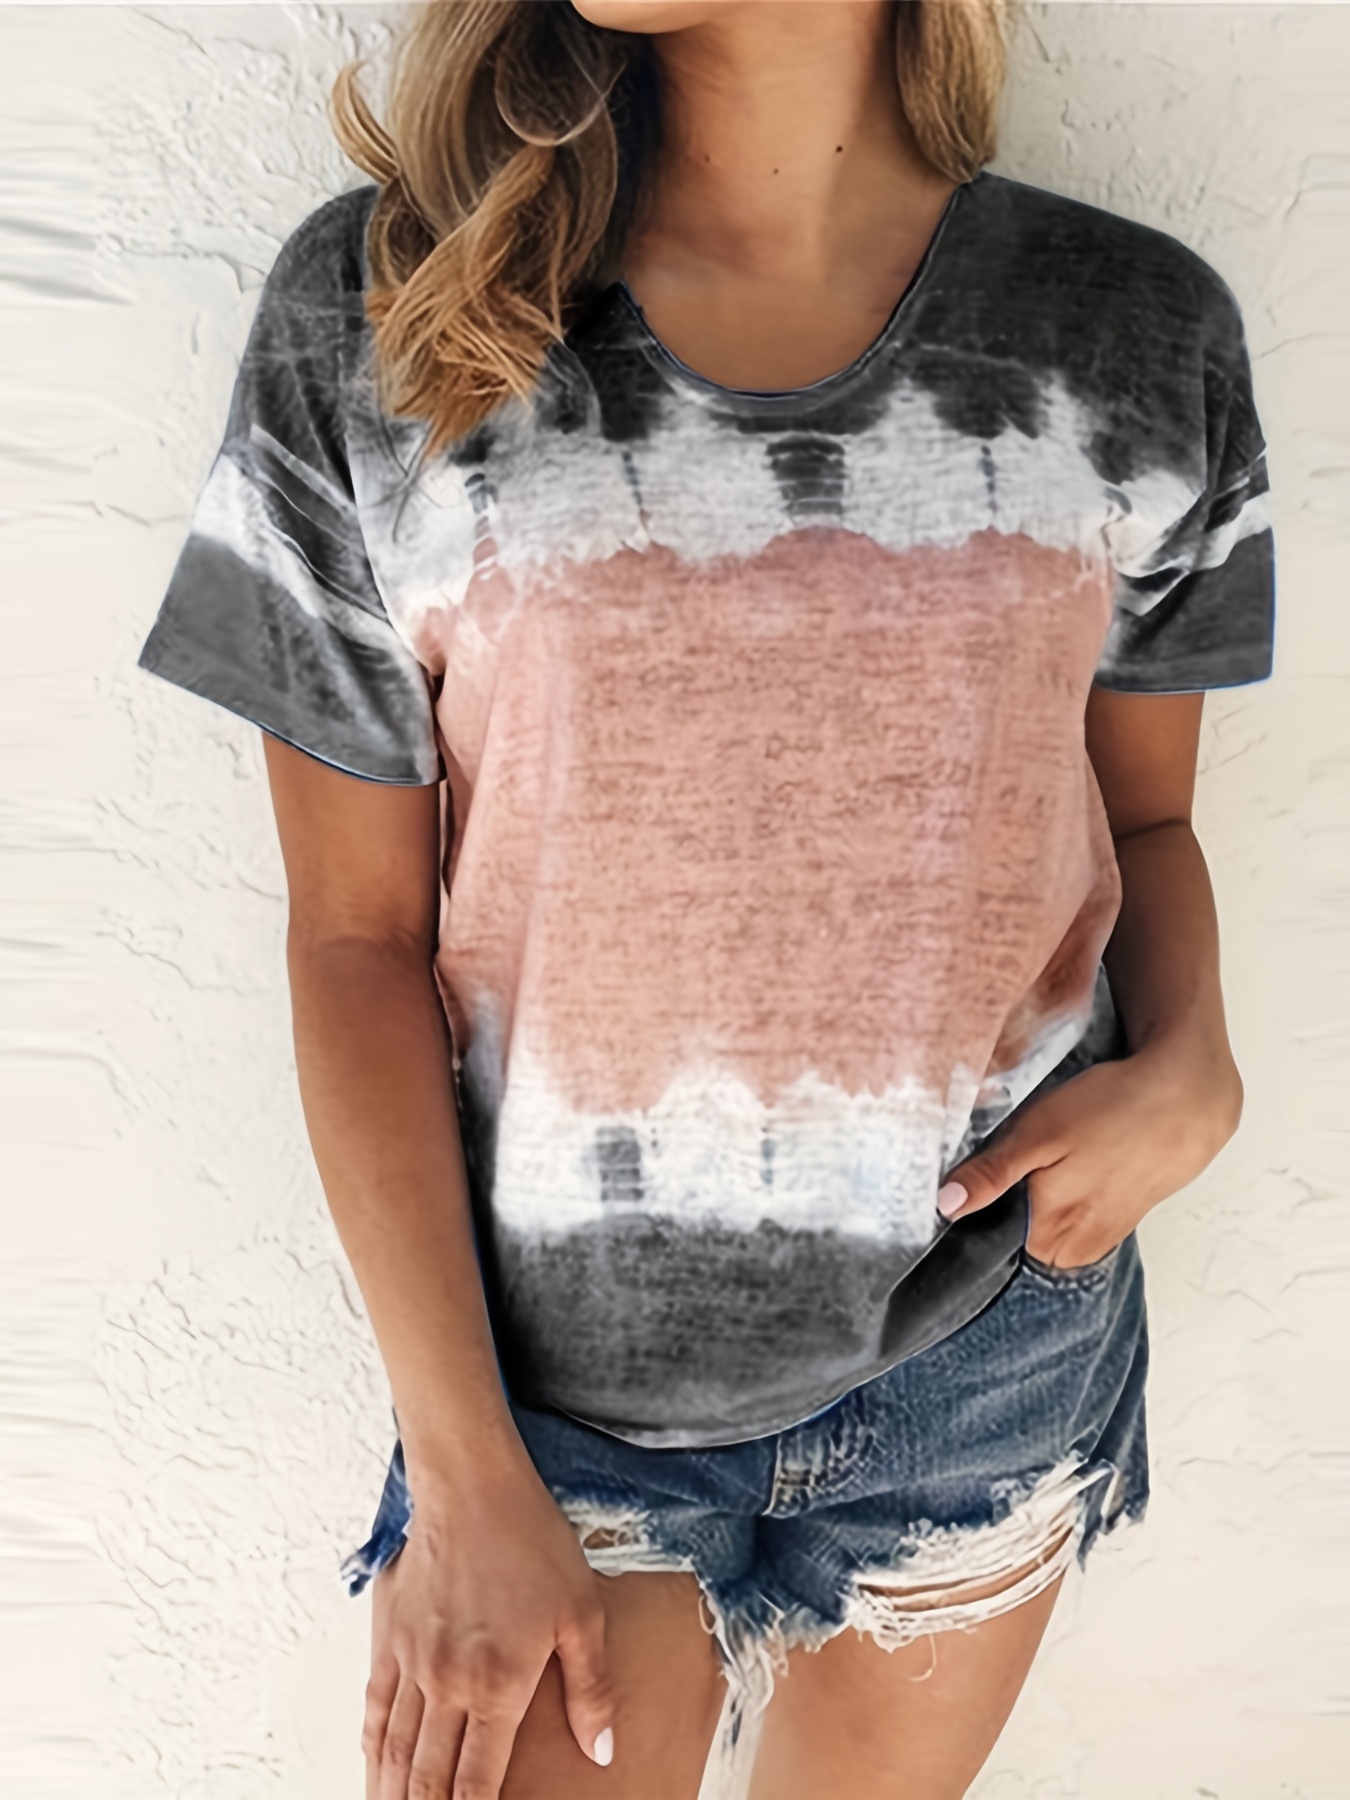  Womens T Shirts Loose Fit Graphic V Neck and Toddler Tank Top  Vintage Top Womens Summer Cotton Tops Women's Shirts Short Sleeve White Tie  Dye Shirt Adult Pink Women T Shirt 